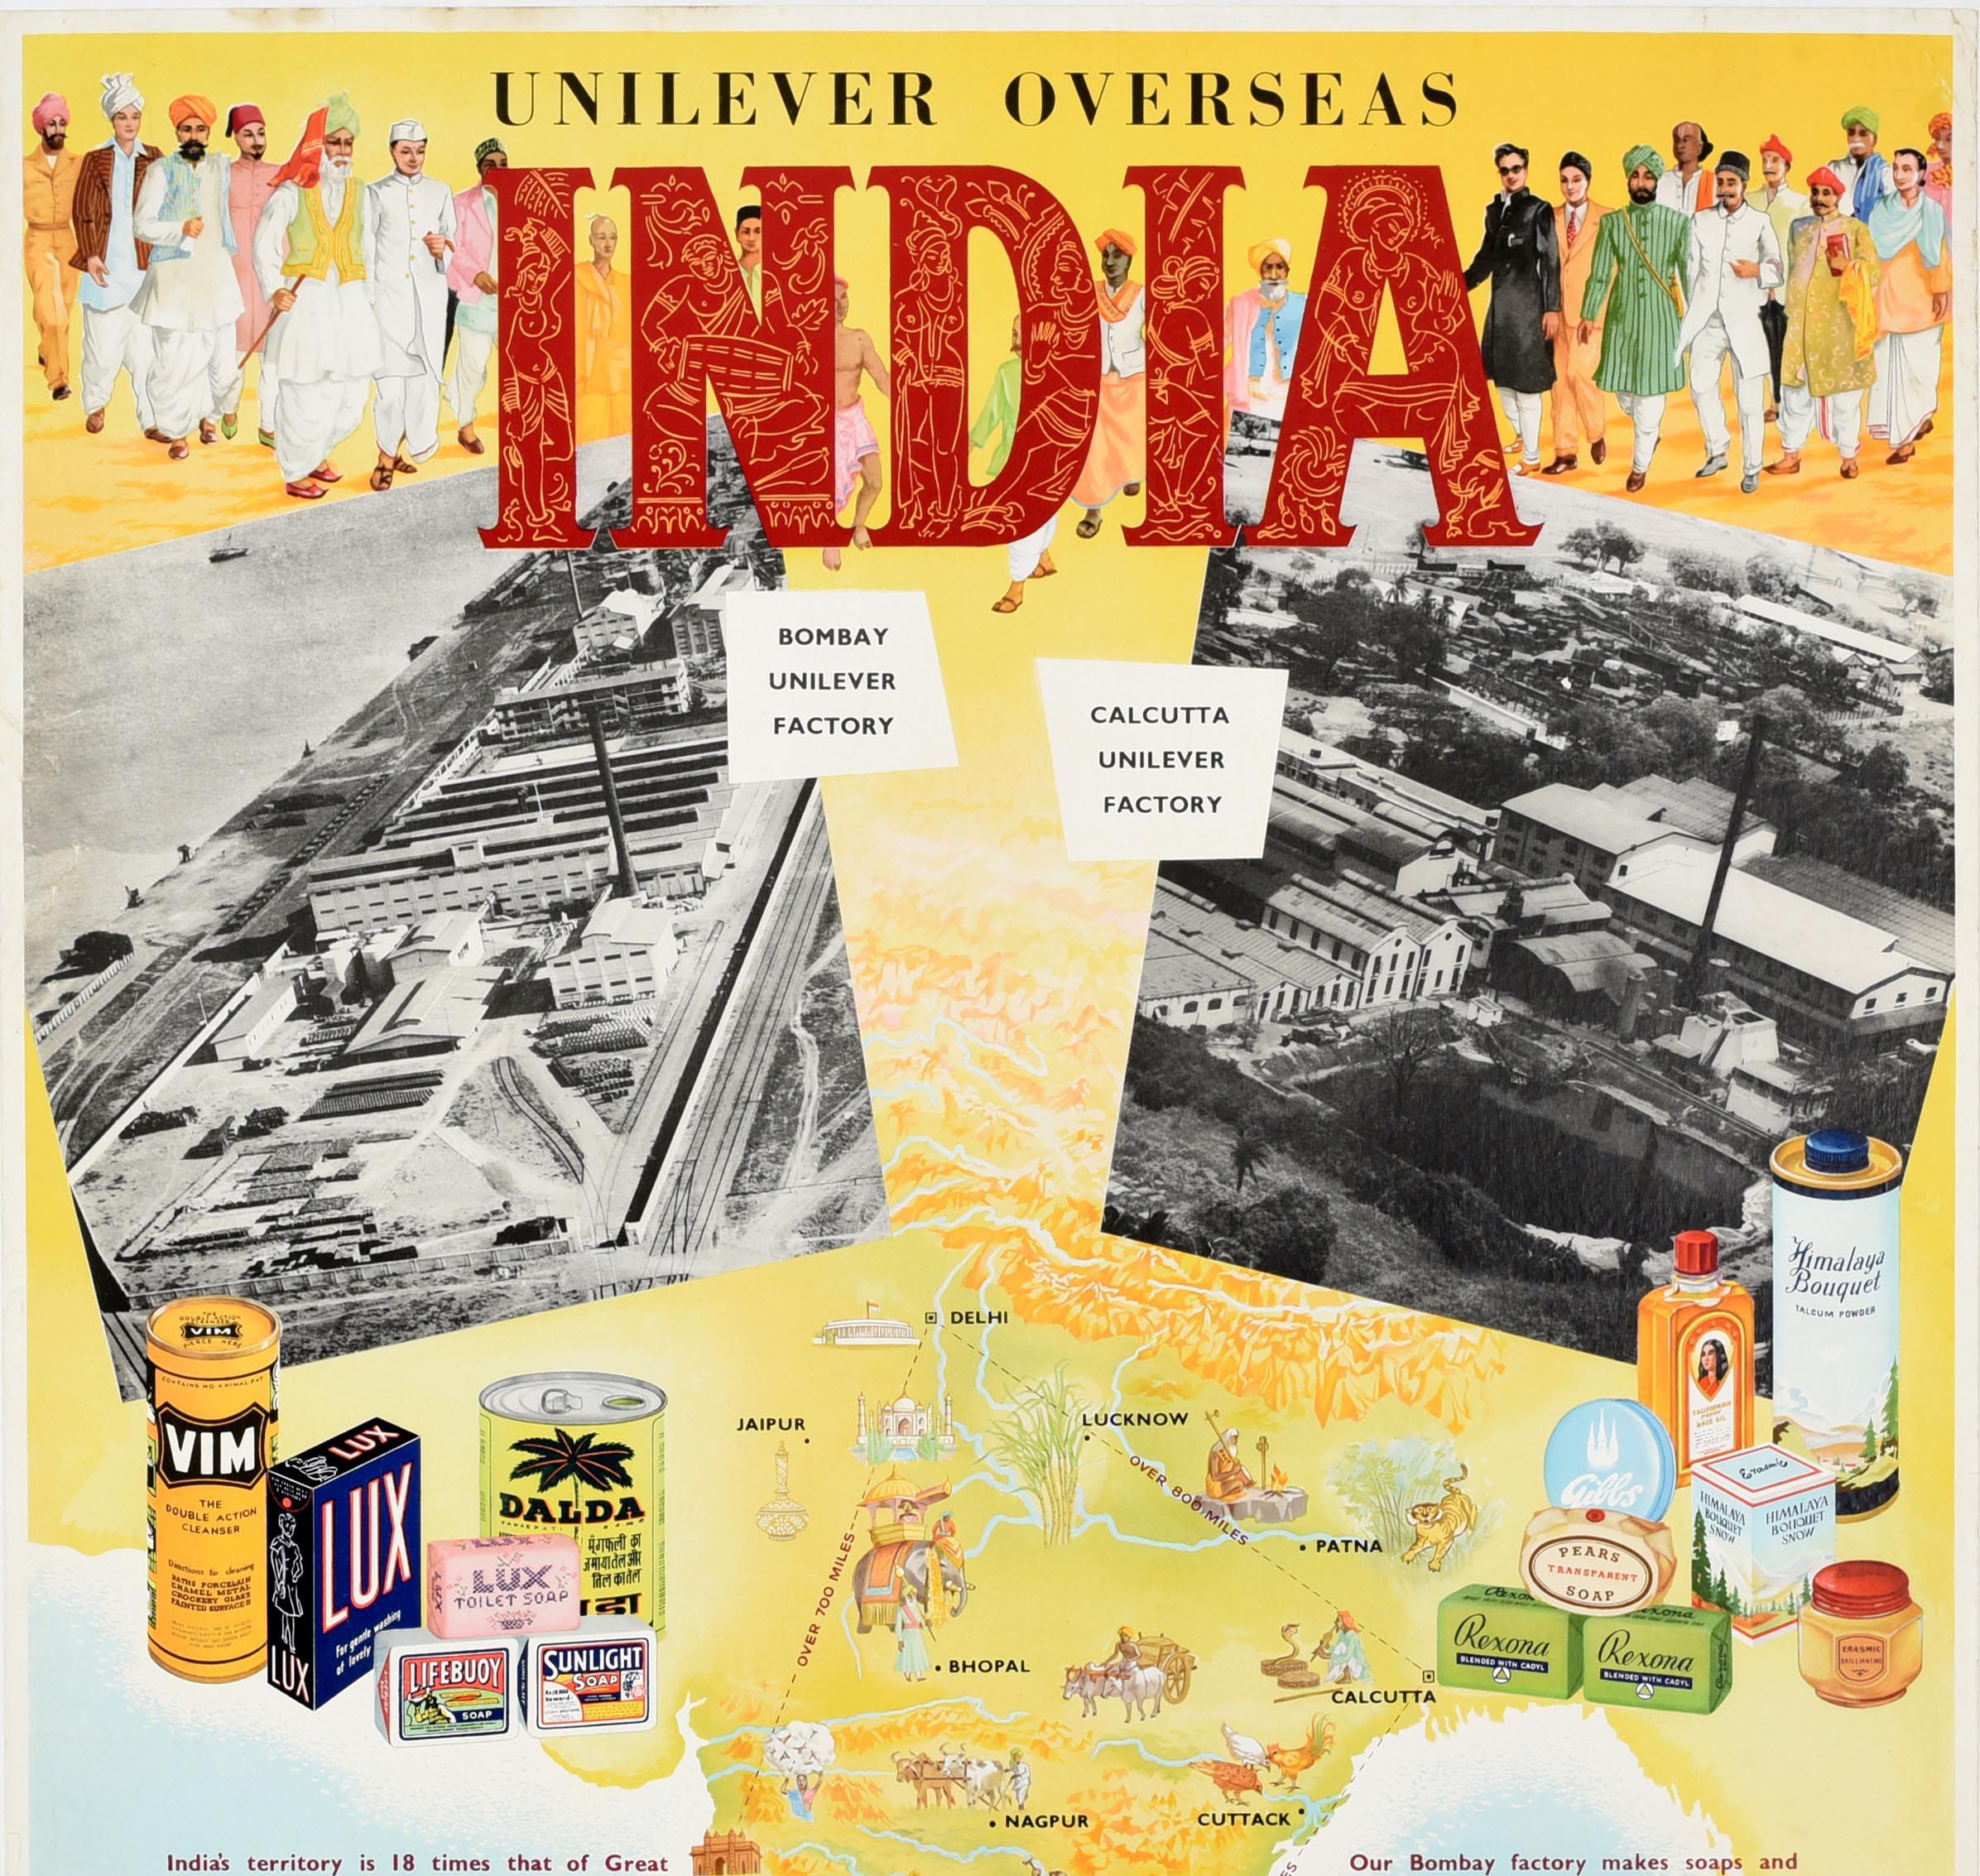 Original Vintage Advertising Poster Unilever Overseas India Illustrated Map - Print by Unknown